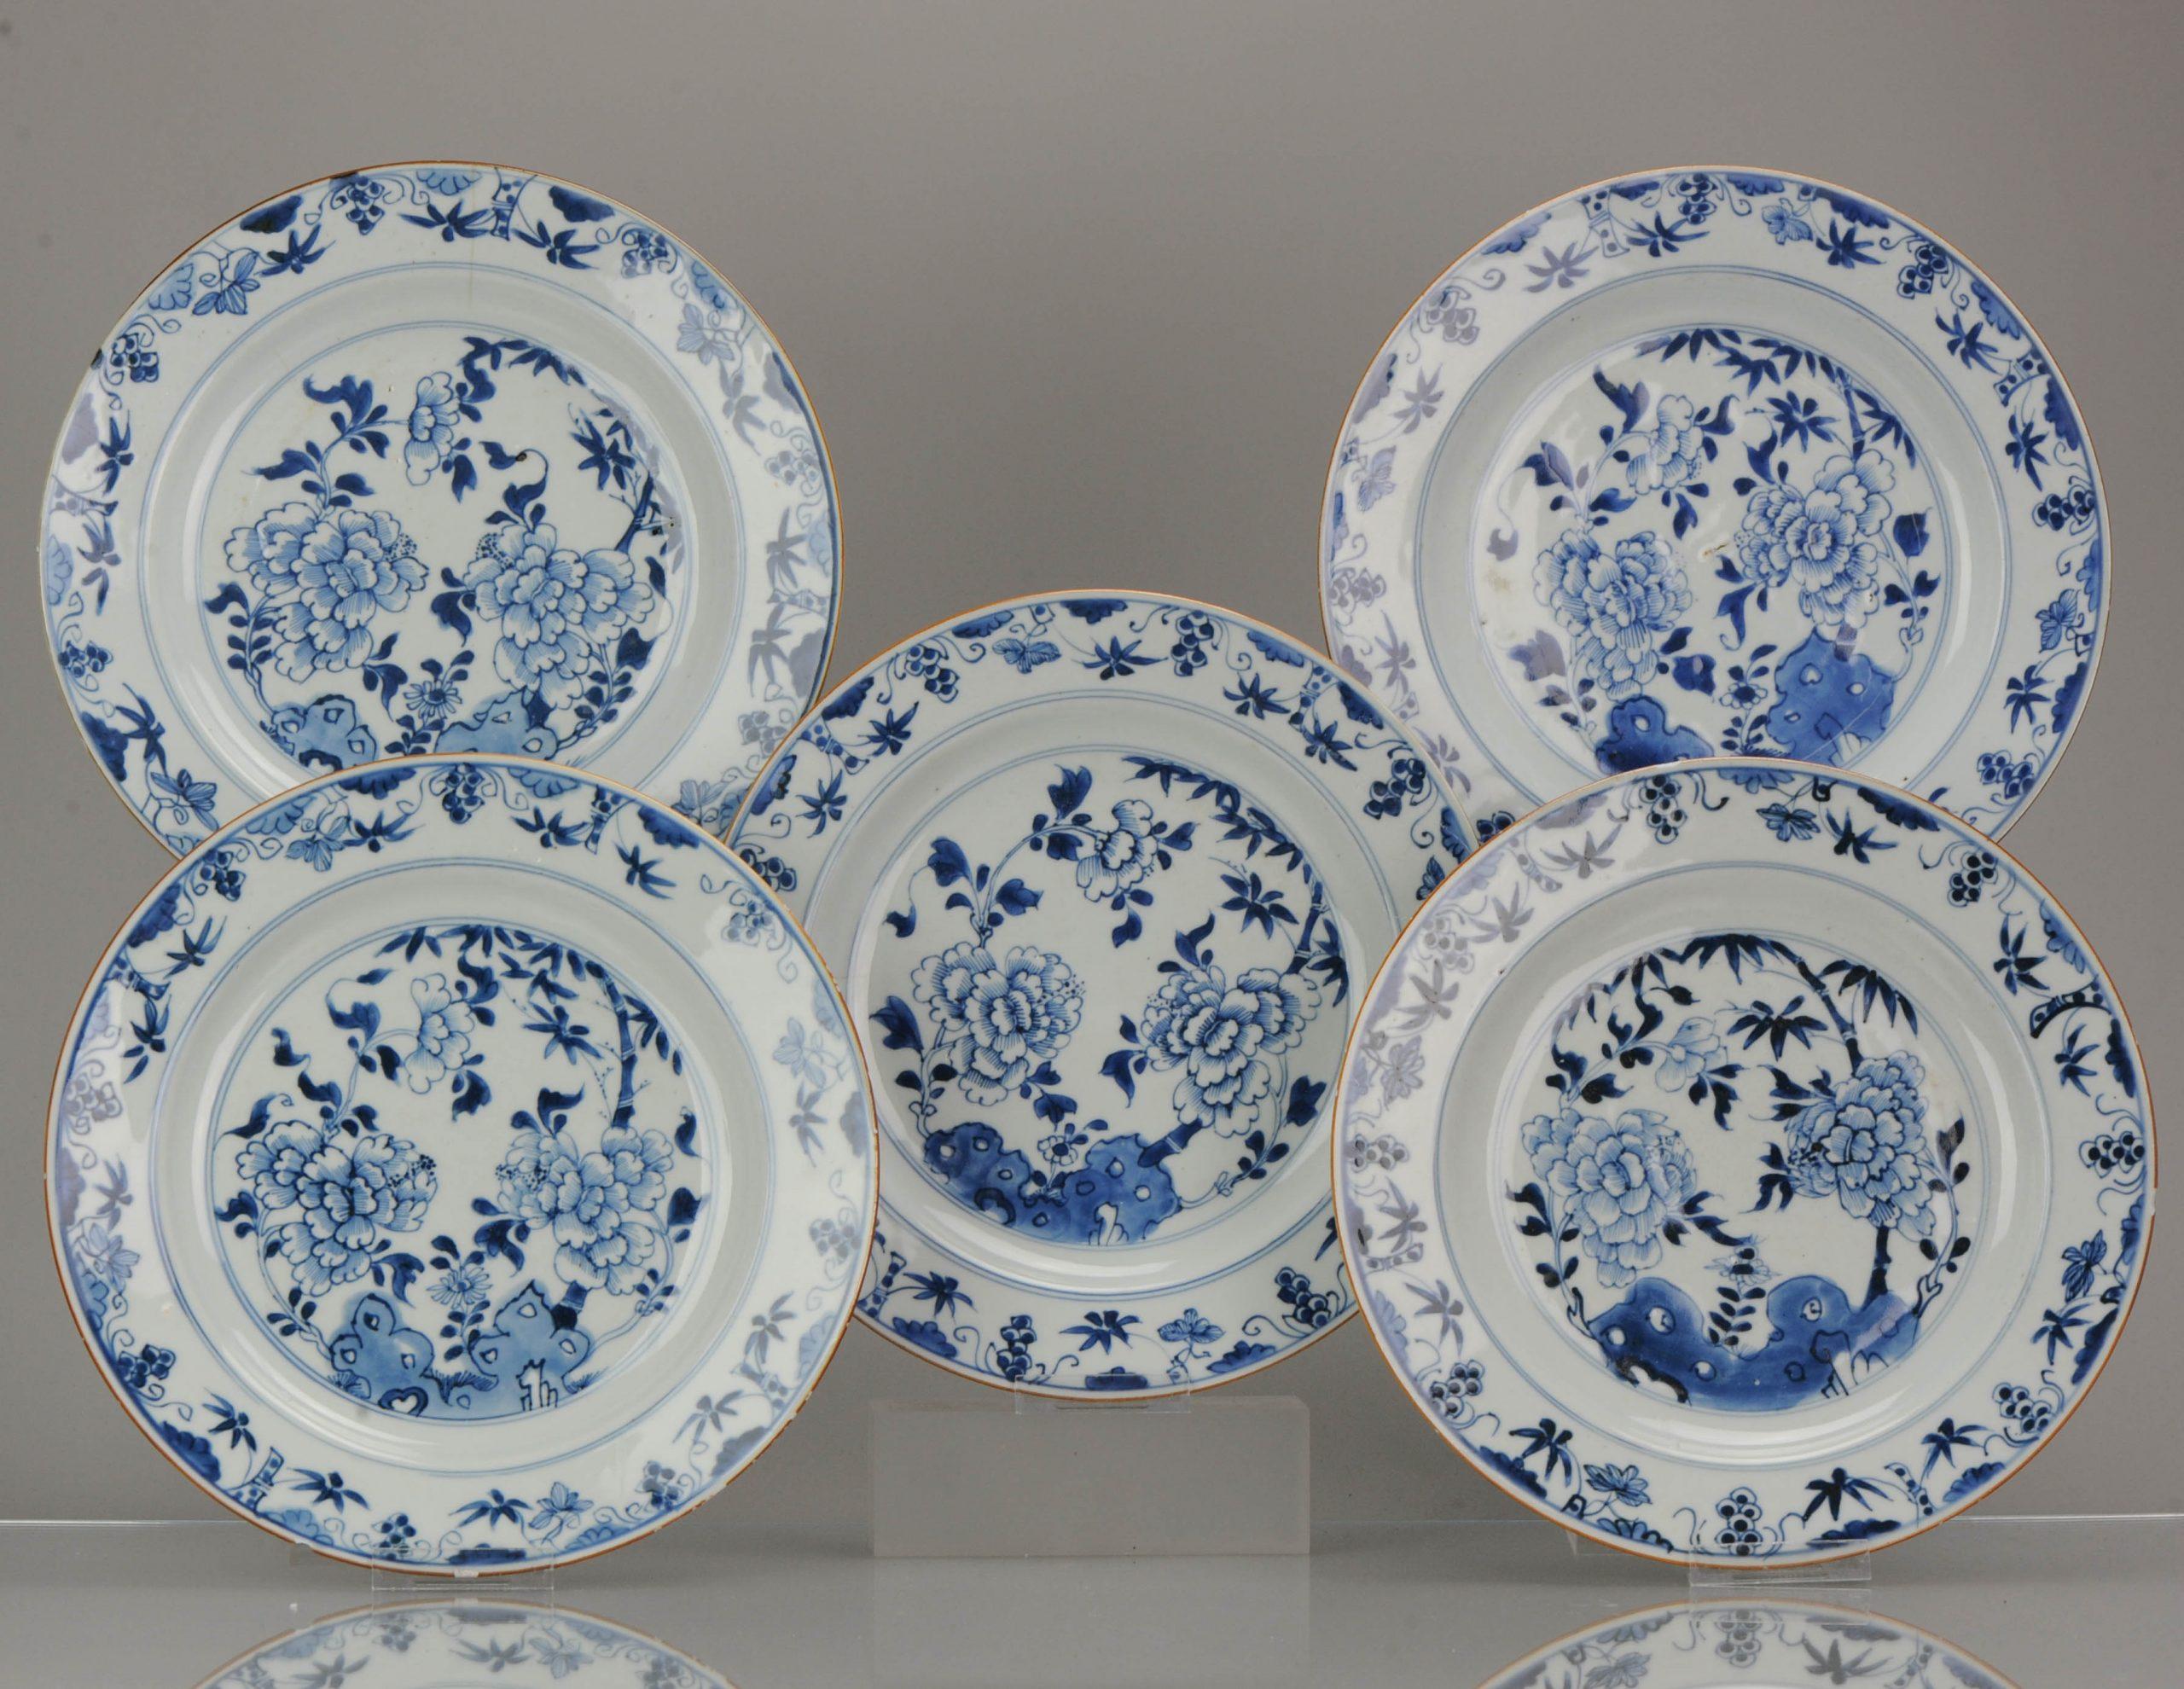 Description
A very nicely decorated set of 5 large plates. Dating to circa 1700-1720, 18th century.

A scene of Rock, Peony and Bamboo.

 

Peony

Peony - Mu-Dan - Queen of Flowers, the peony is an emblem of wealth and